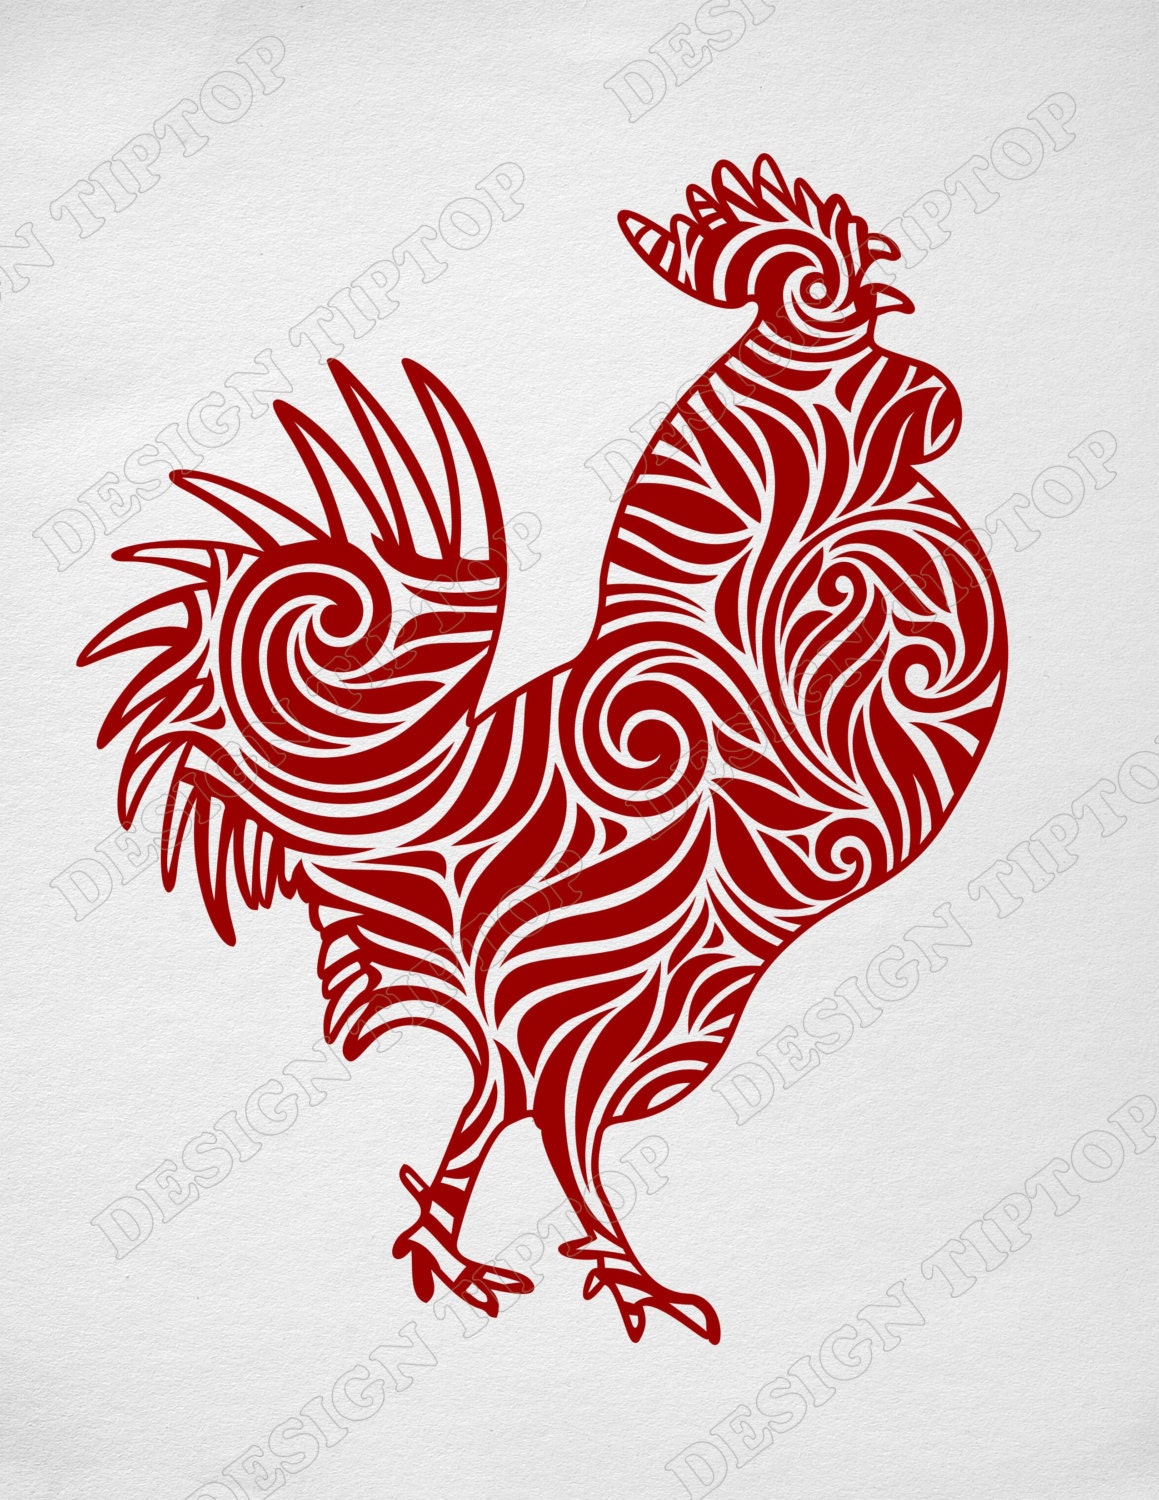 Download Zentangle SVG zen rooster chinese symbol 2017 Christmas